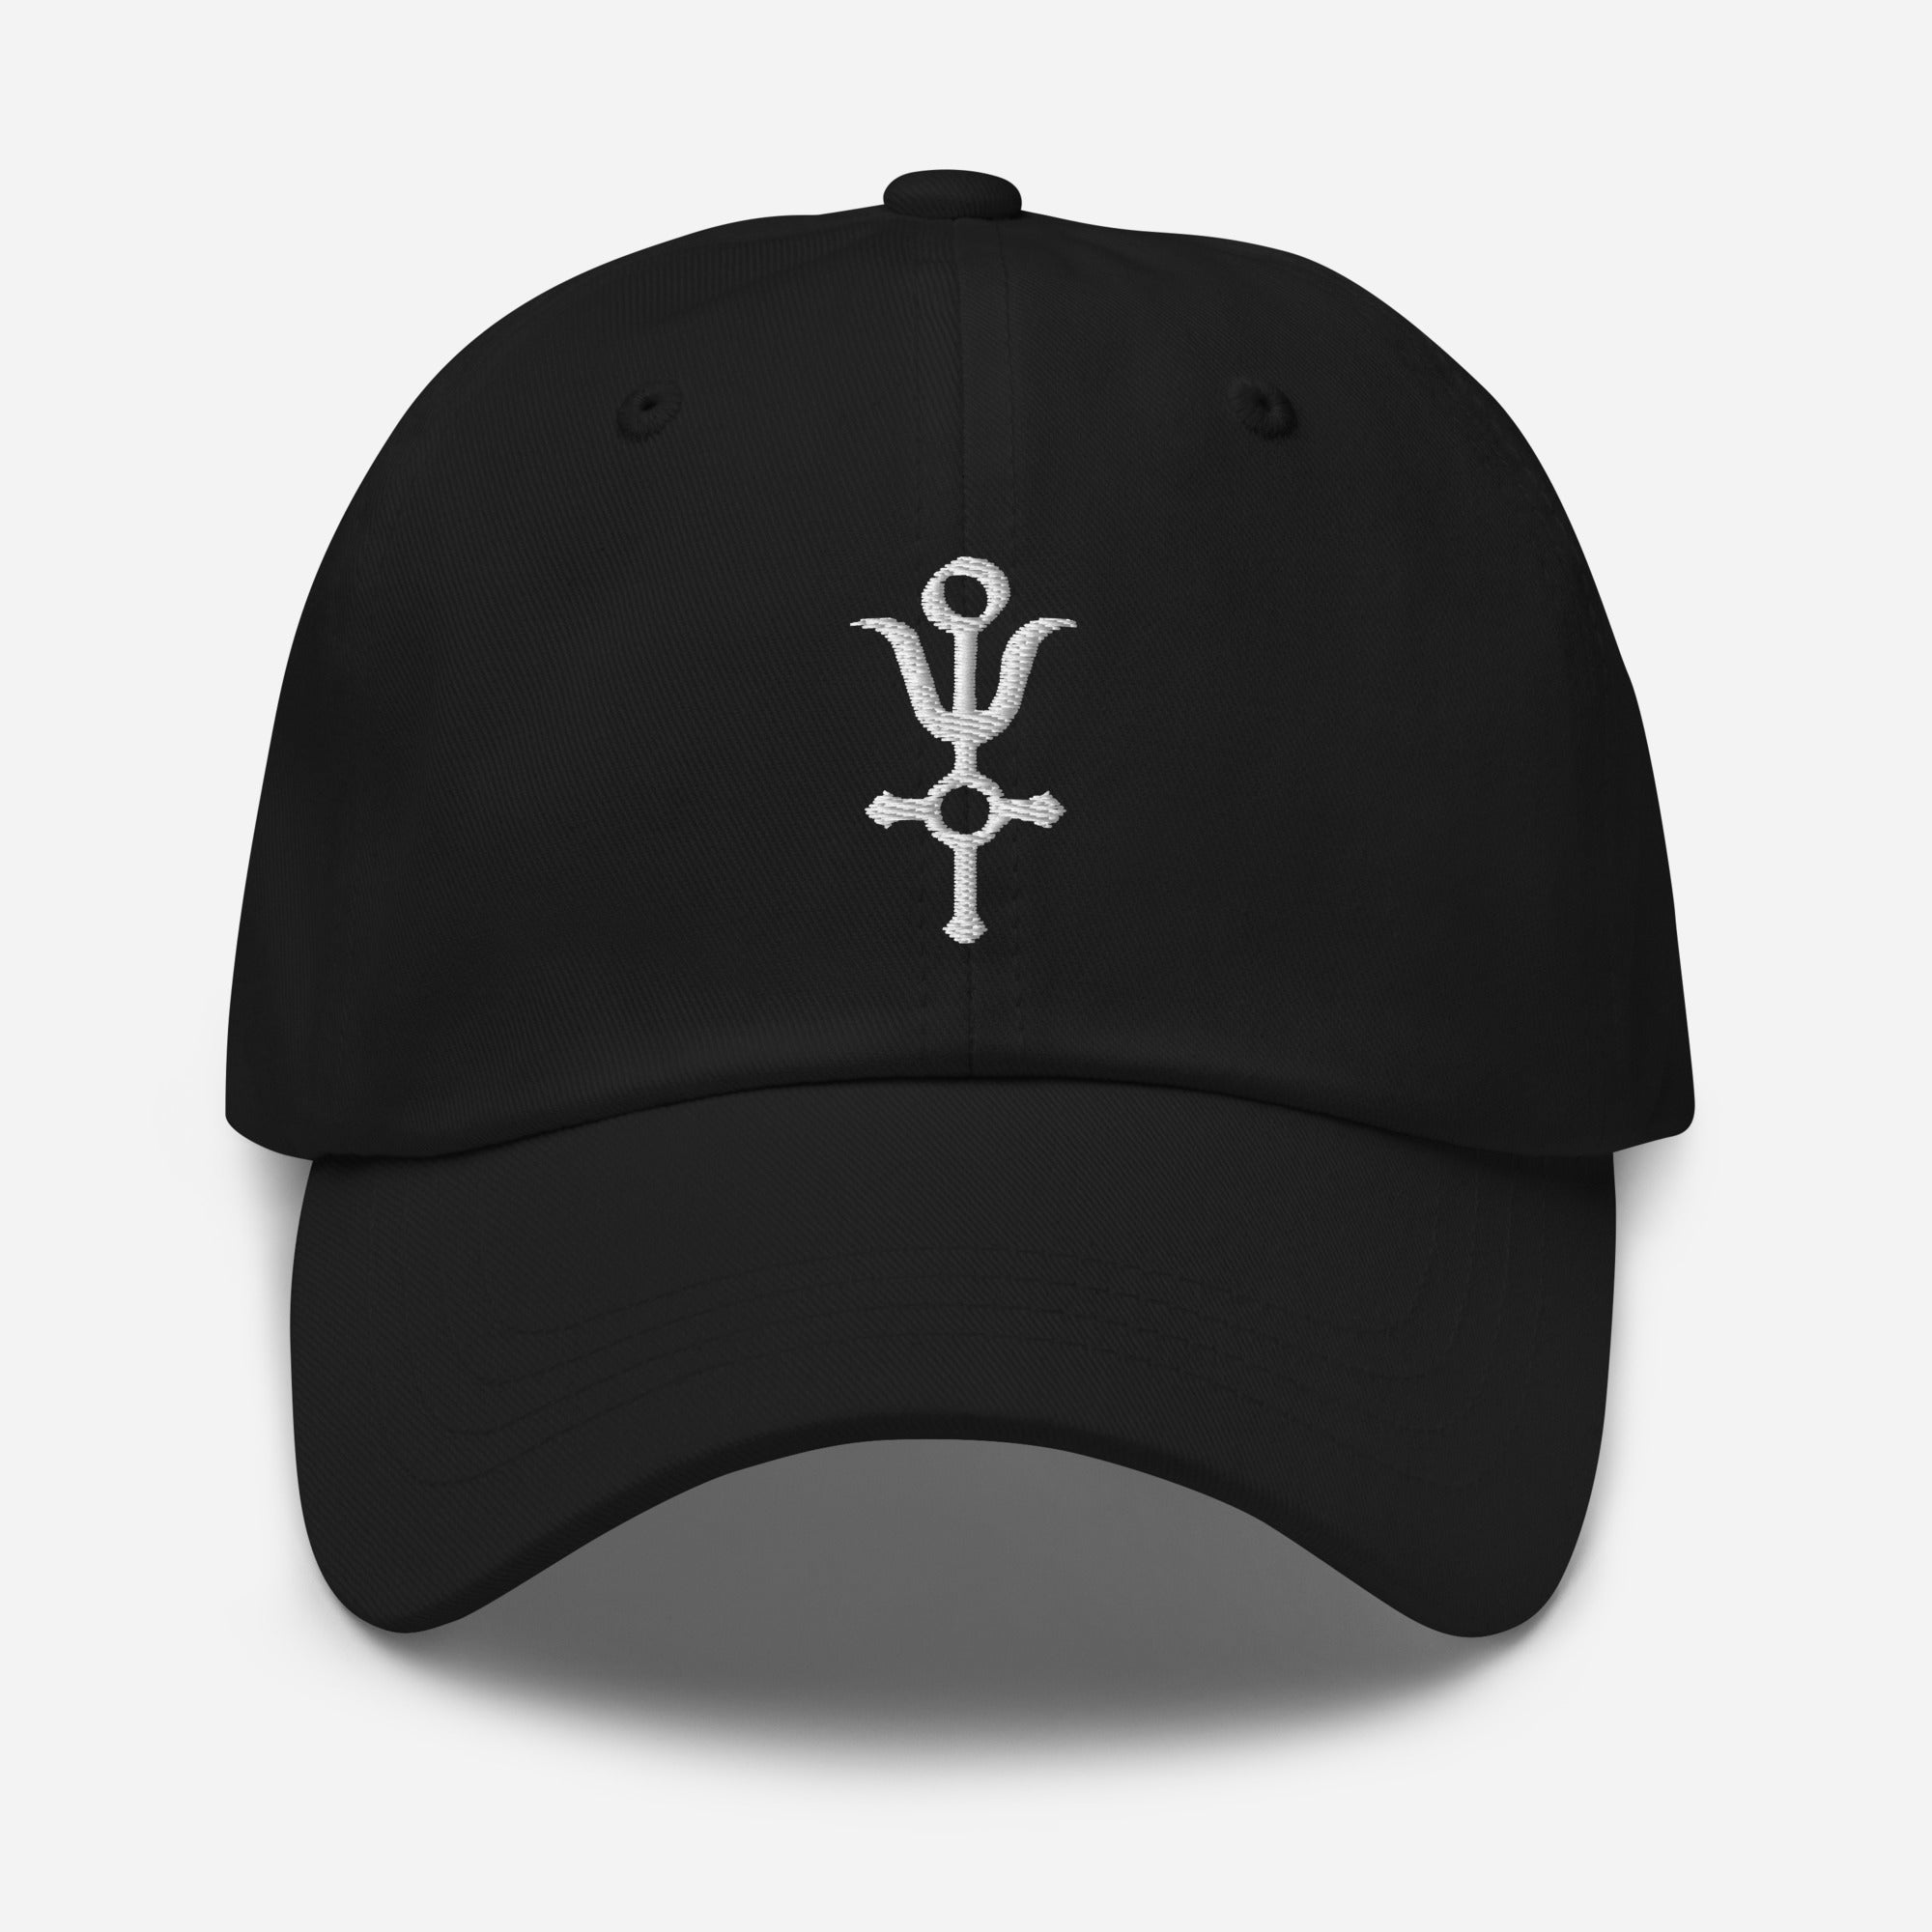 Antimony Alchemy Protection Symbol Embroidered Baseball Cap Dad hat